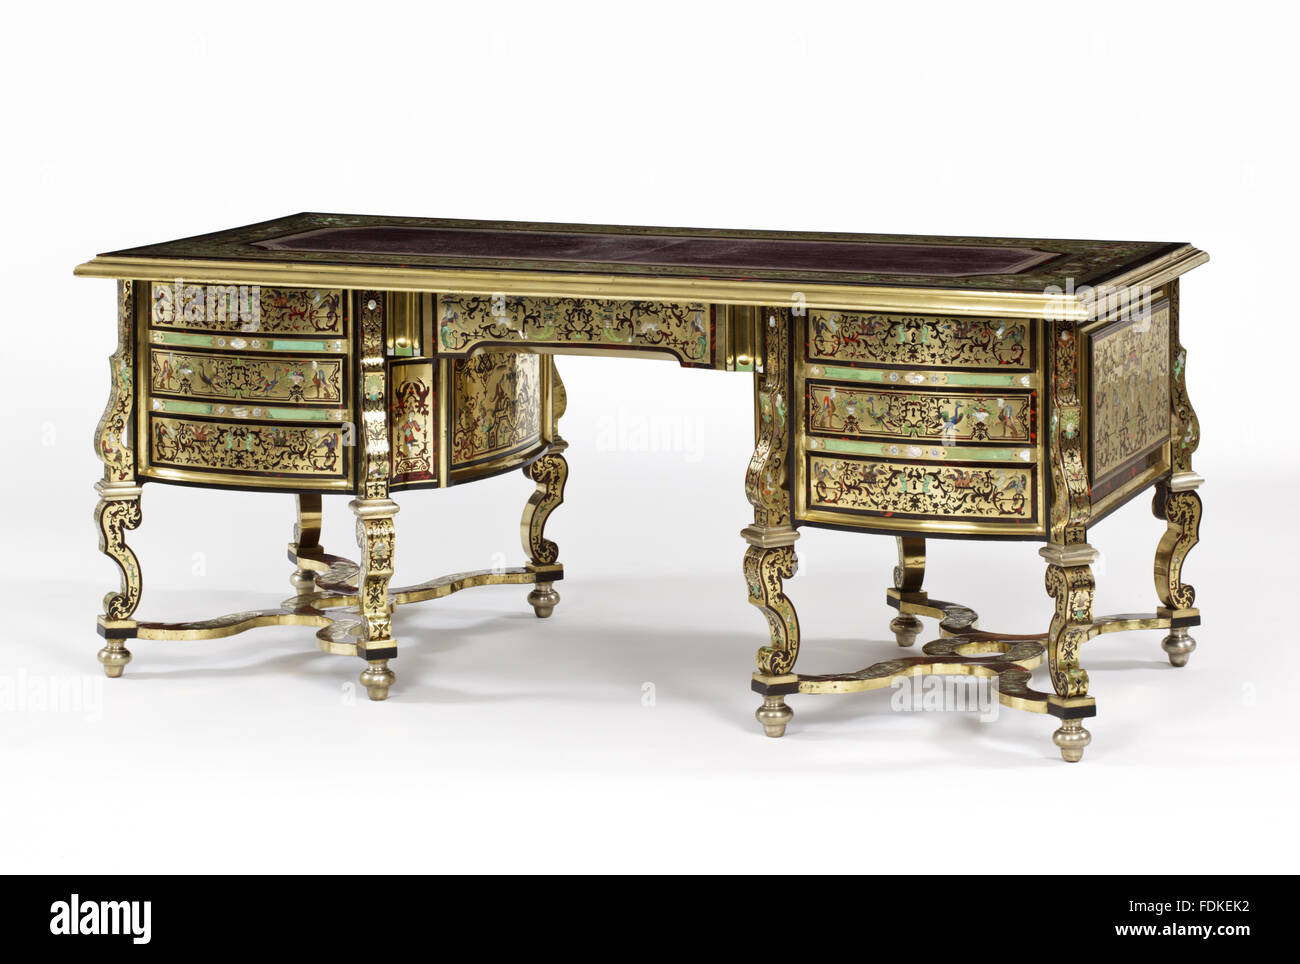 Louis XIV writing table for many years believed to be by Andre Charles Boulle (1642-1732). On a carcass of beech wood, this table is veneered in brass and tortoise shell, the brass veneers being inlaid with elaborate polychrome marquetry patterns in mothe Stock Photo